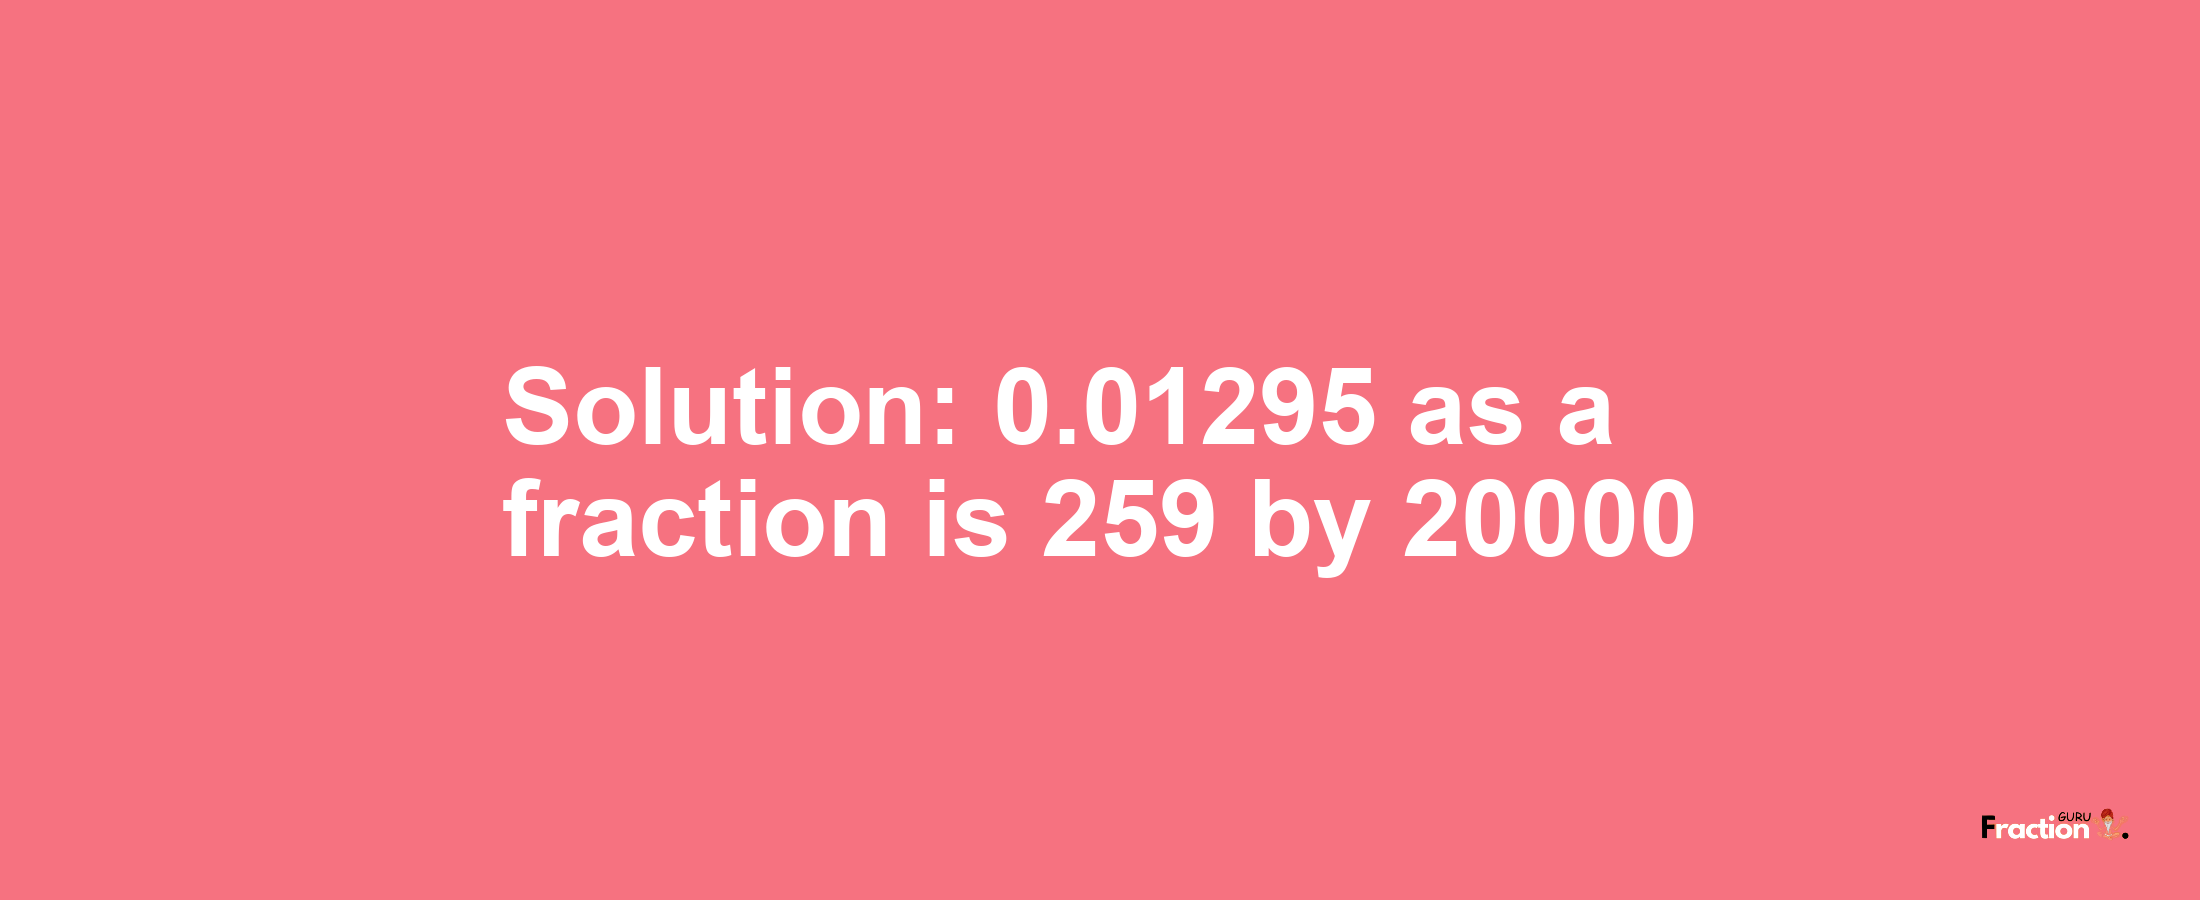 Solution:0.01295 as a fraction is 259/20000